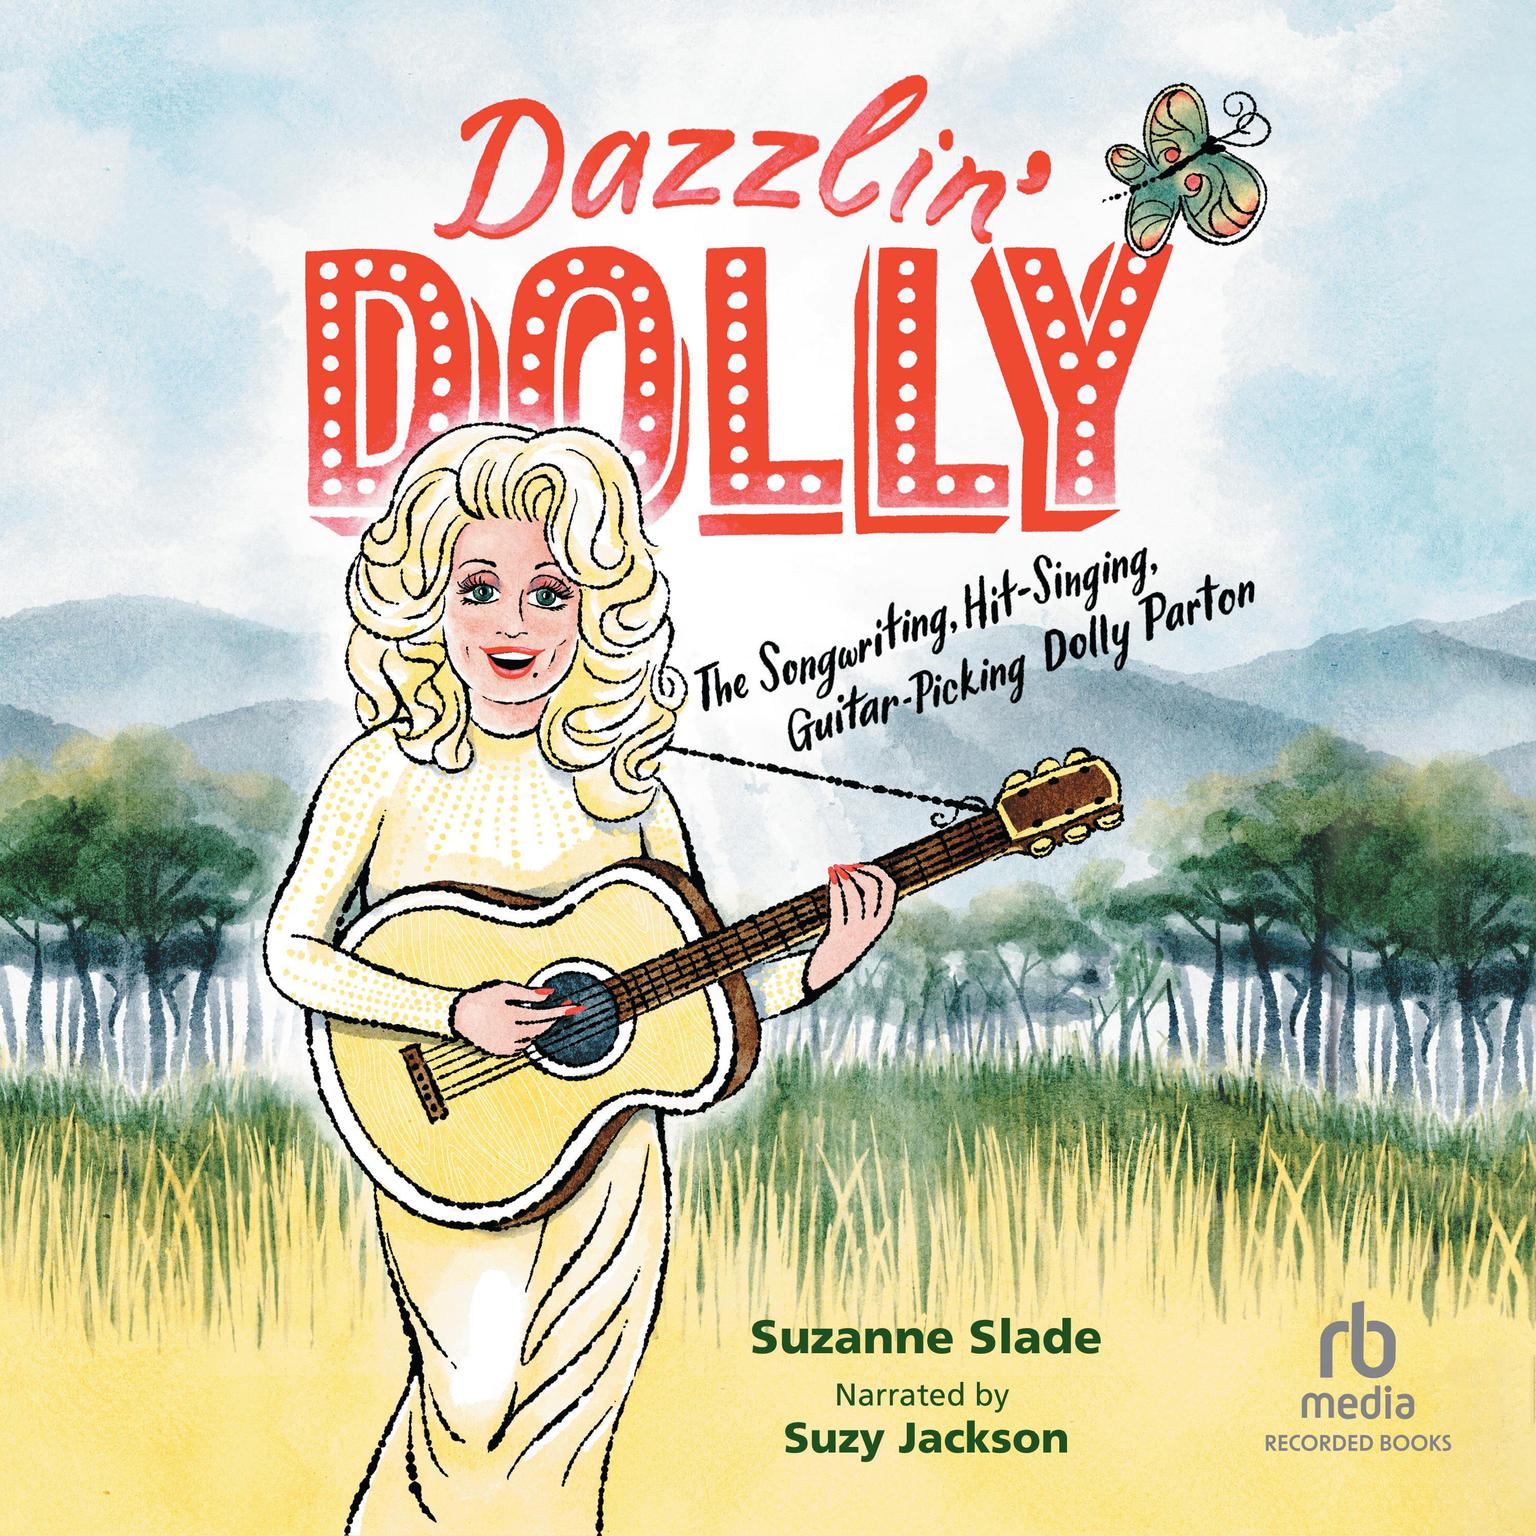 Dazzlin Dolly: The Songwriting, Hit-Singing, Guitar-Picking Dolly Parton Audiobook, by Suzanne Slade